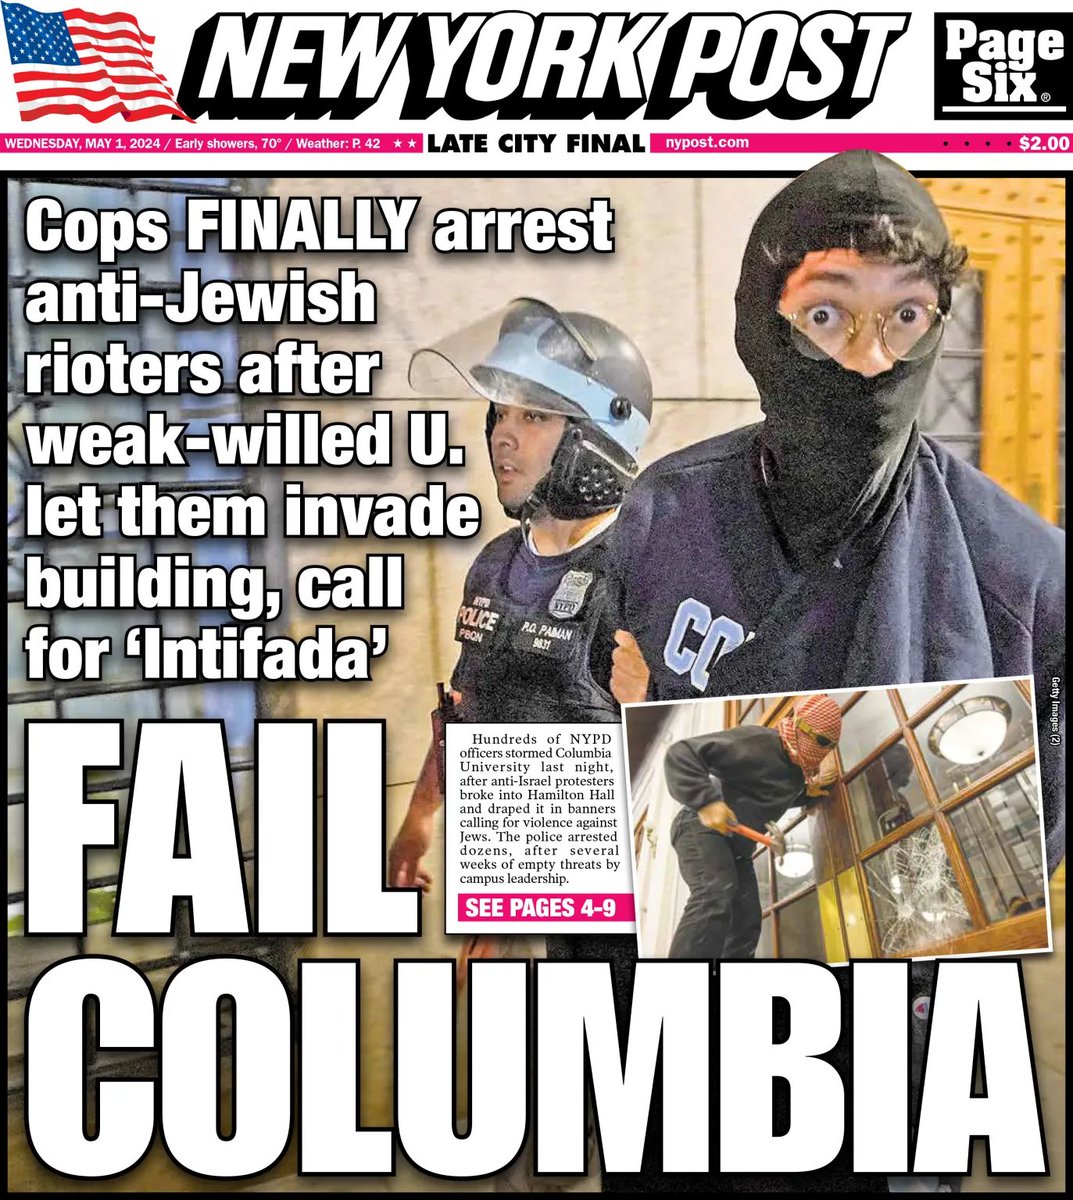 Thank you to the brave law enforcement officers who stepped up where @Columbia completely failed.